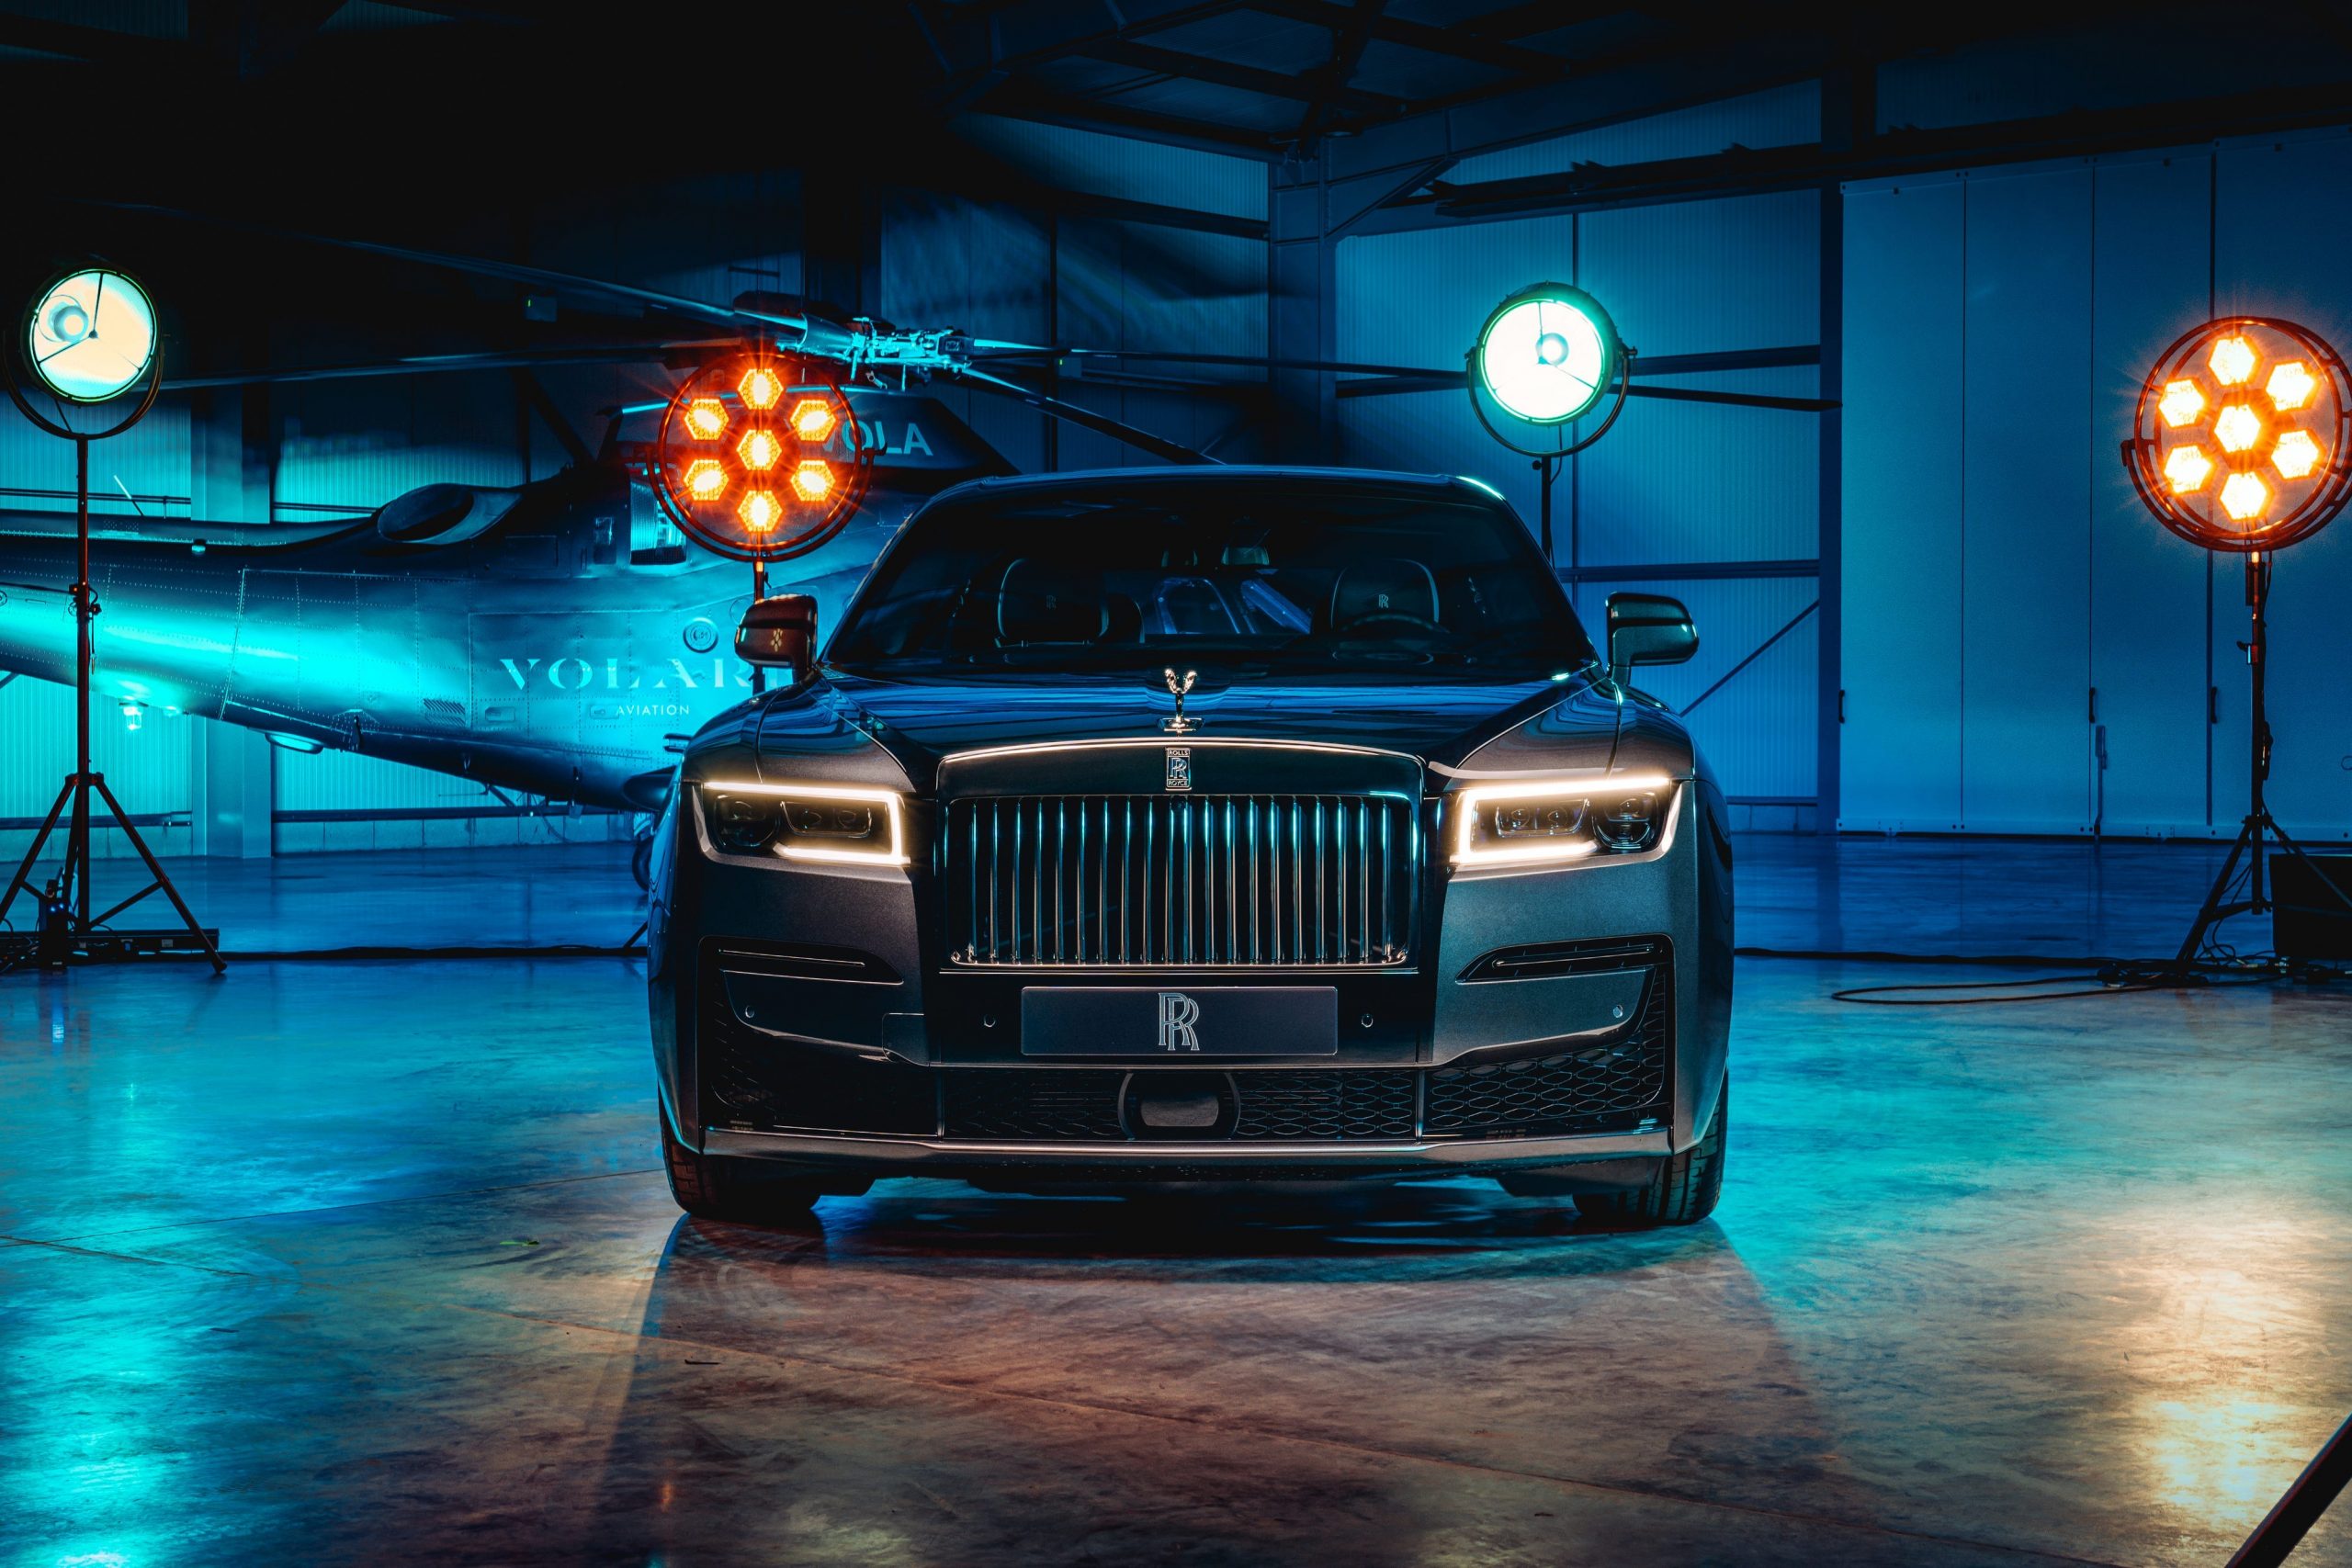 The Rolls-Royce Ghost Black Badge at night.